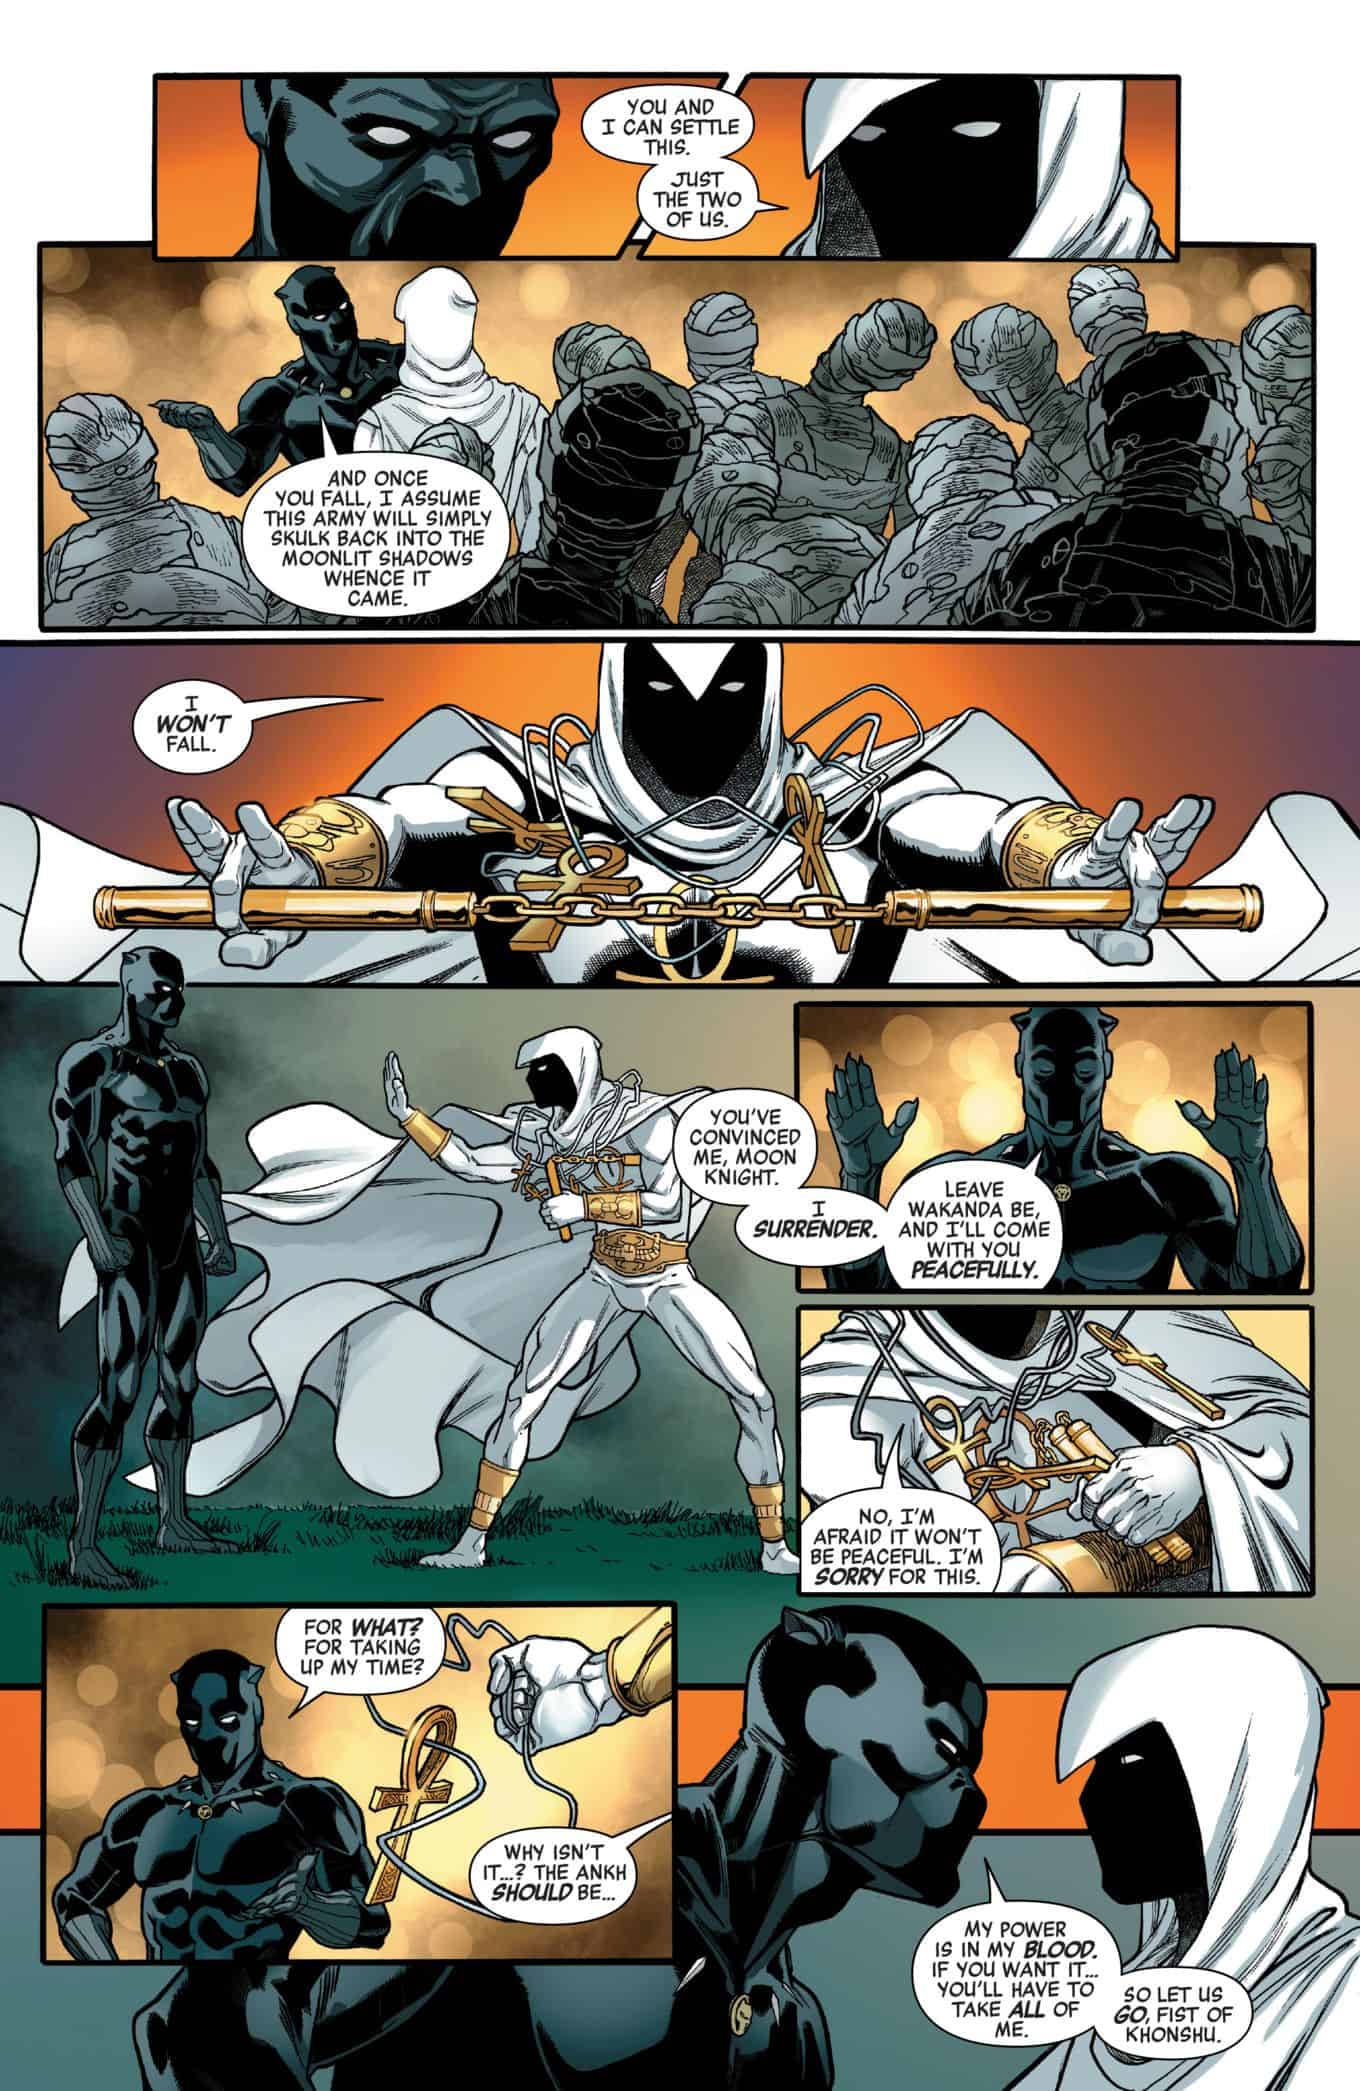 How Can Moon Knight Beat Thor? Avengers #33 Spoilers